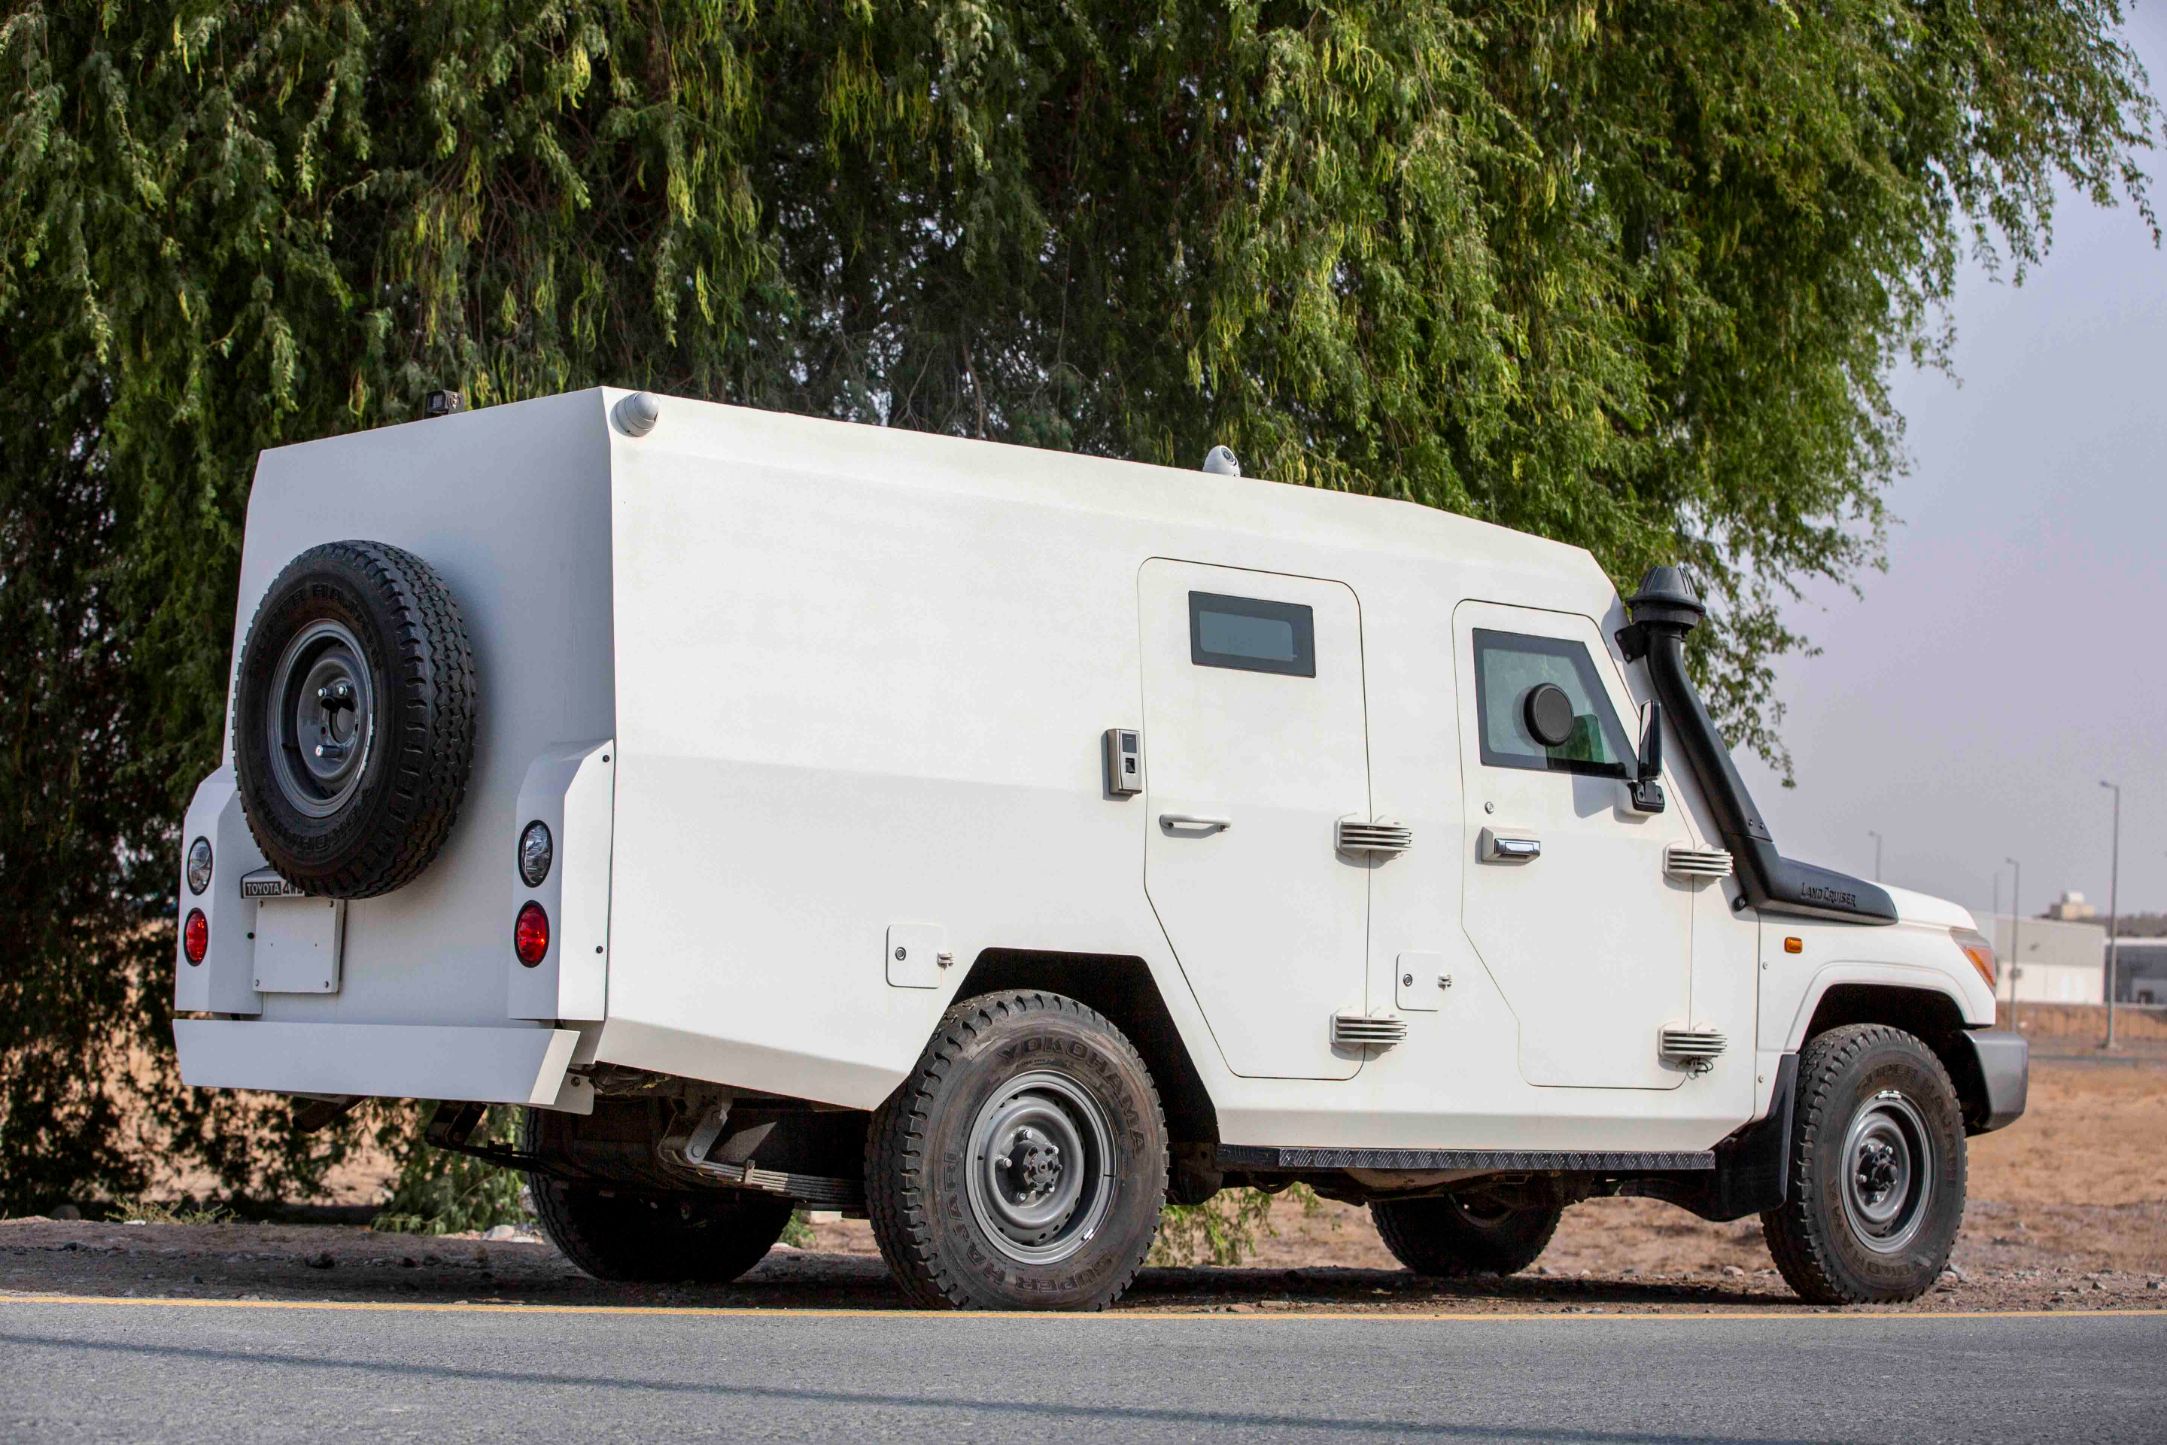        The Mahindra Armoured Toyota Land Cruiser 78 Cash in Transit